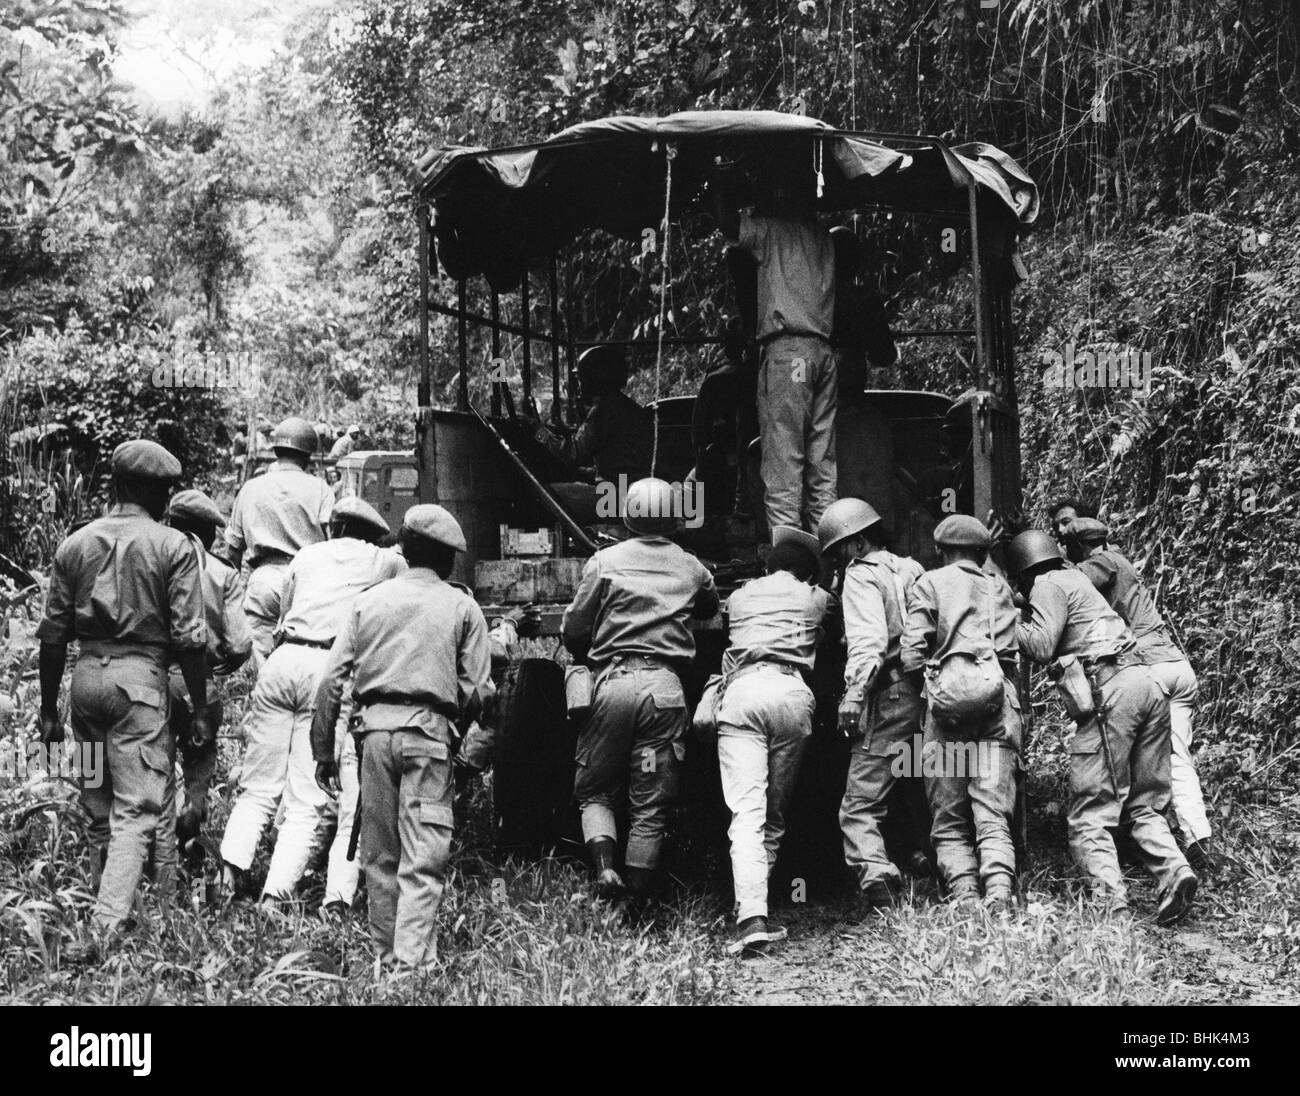 geography / travel, Congo, Simba uprising 1964 - 1965, mercenaries towing a stucked truck, November 1964, Congo crisis, Civil War, Africa, military, advance, 20th century, historic, historical, lorry, jungle, 1960s, people, Stock Photo